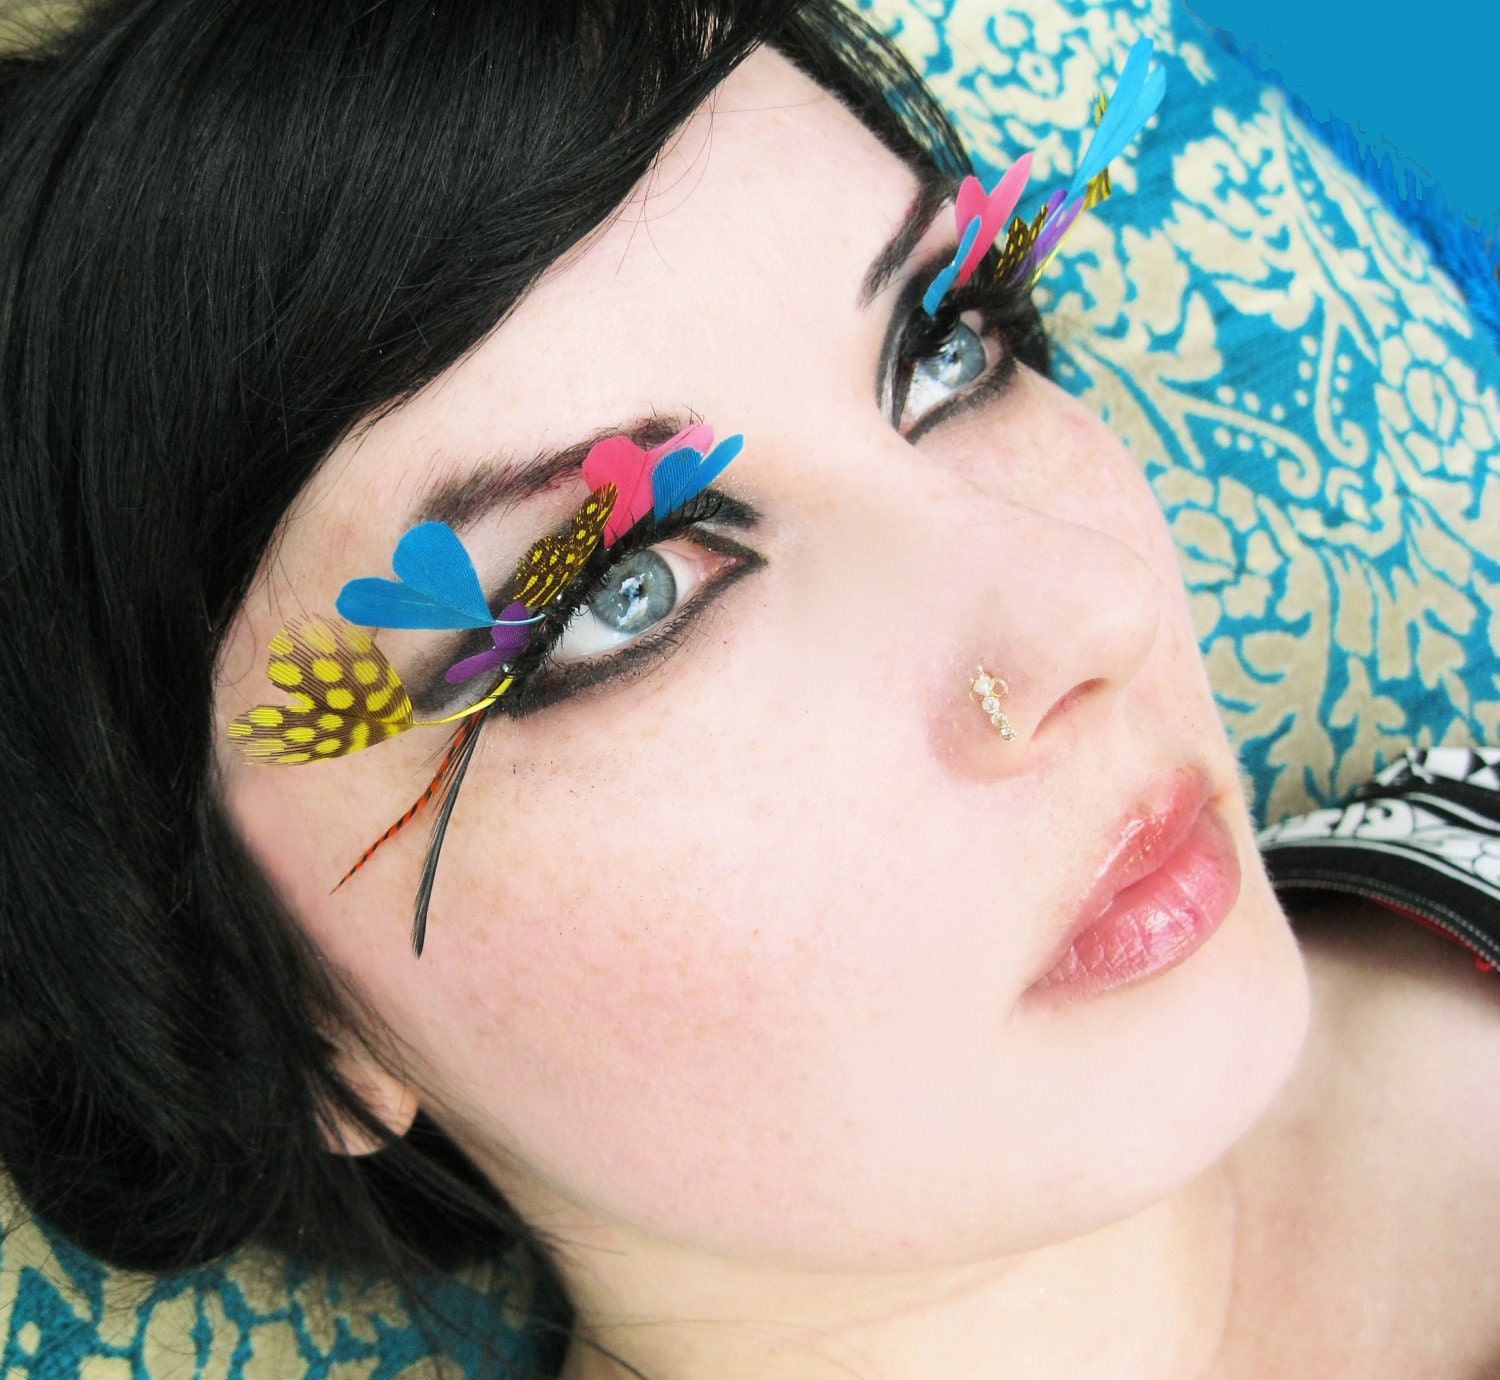 Love Eyes - Mod Psychedelic Feather Eyelashes w/ Rainbow-Colored Hearts and Swarovski Crystals - By Moonshine Baby